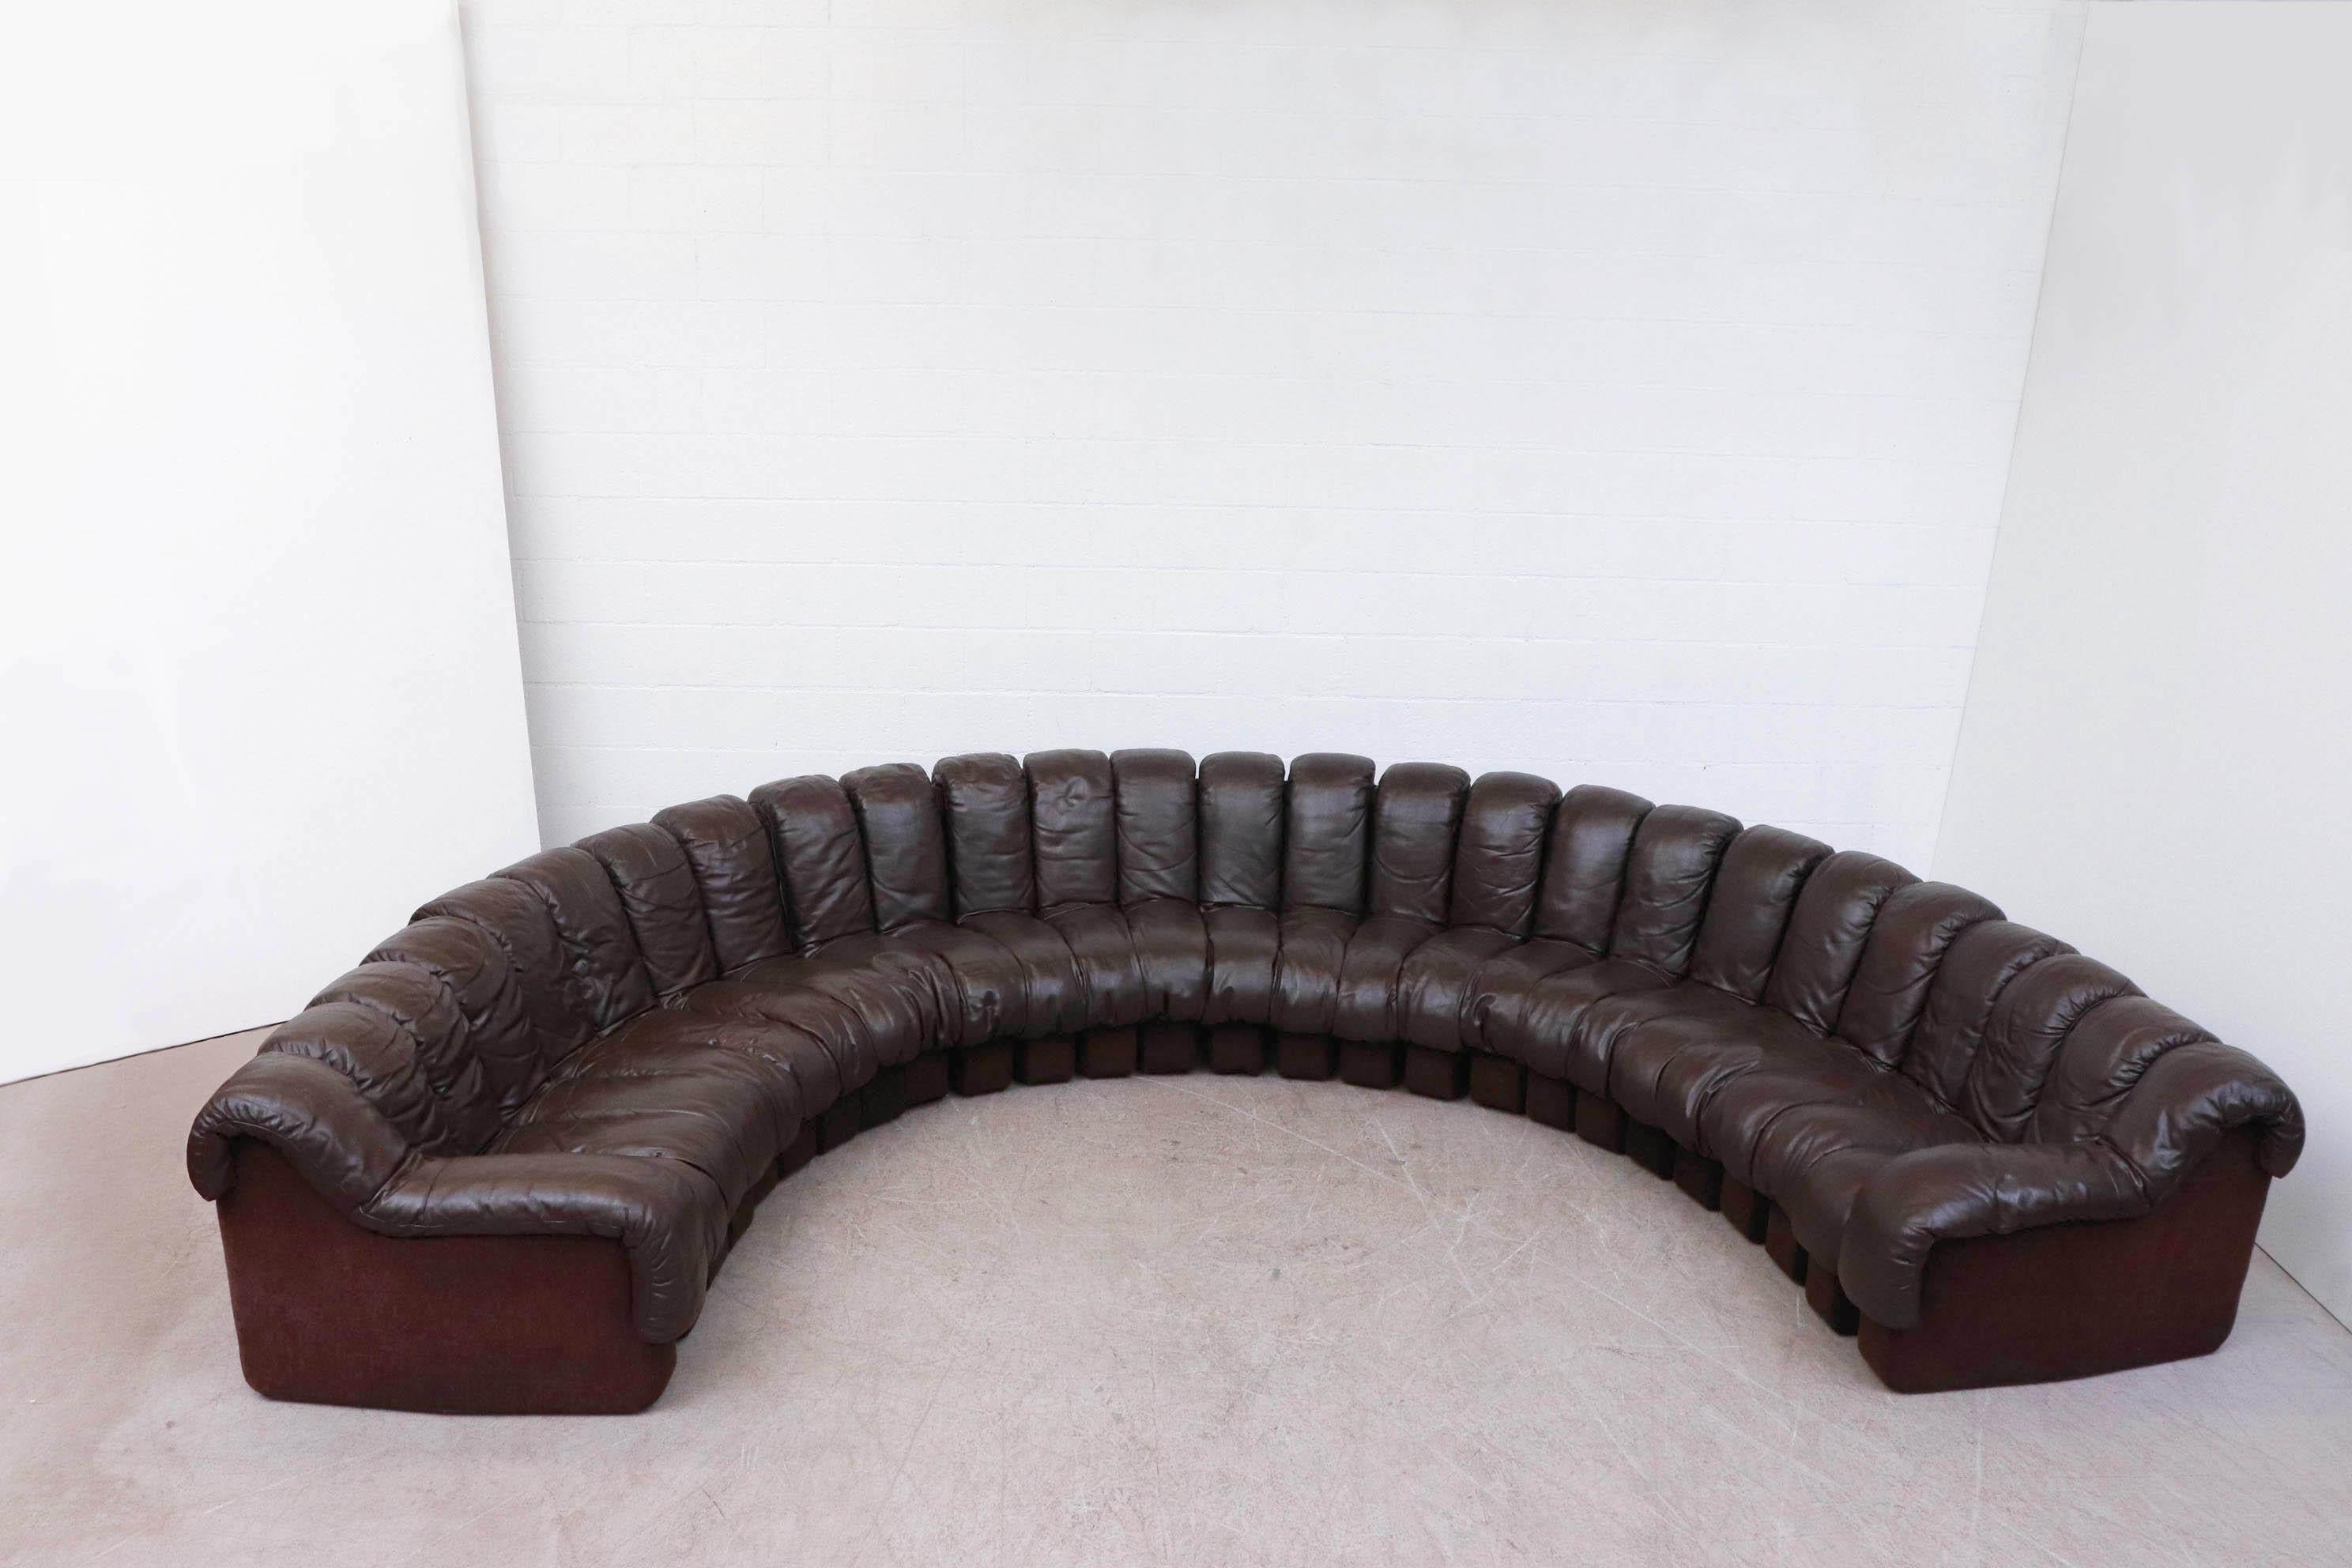 Amazing 26-piece brown leather De Sede 'DS 600' non-stop sectional sofa by Heinz Ulrich, Ueli bergere, and Elenora Peduzzi-Riva. Original leather upholstery with felt bases, composed of multiple pieces which hook and zip together. In original